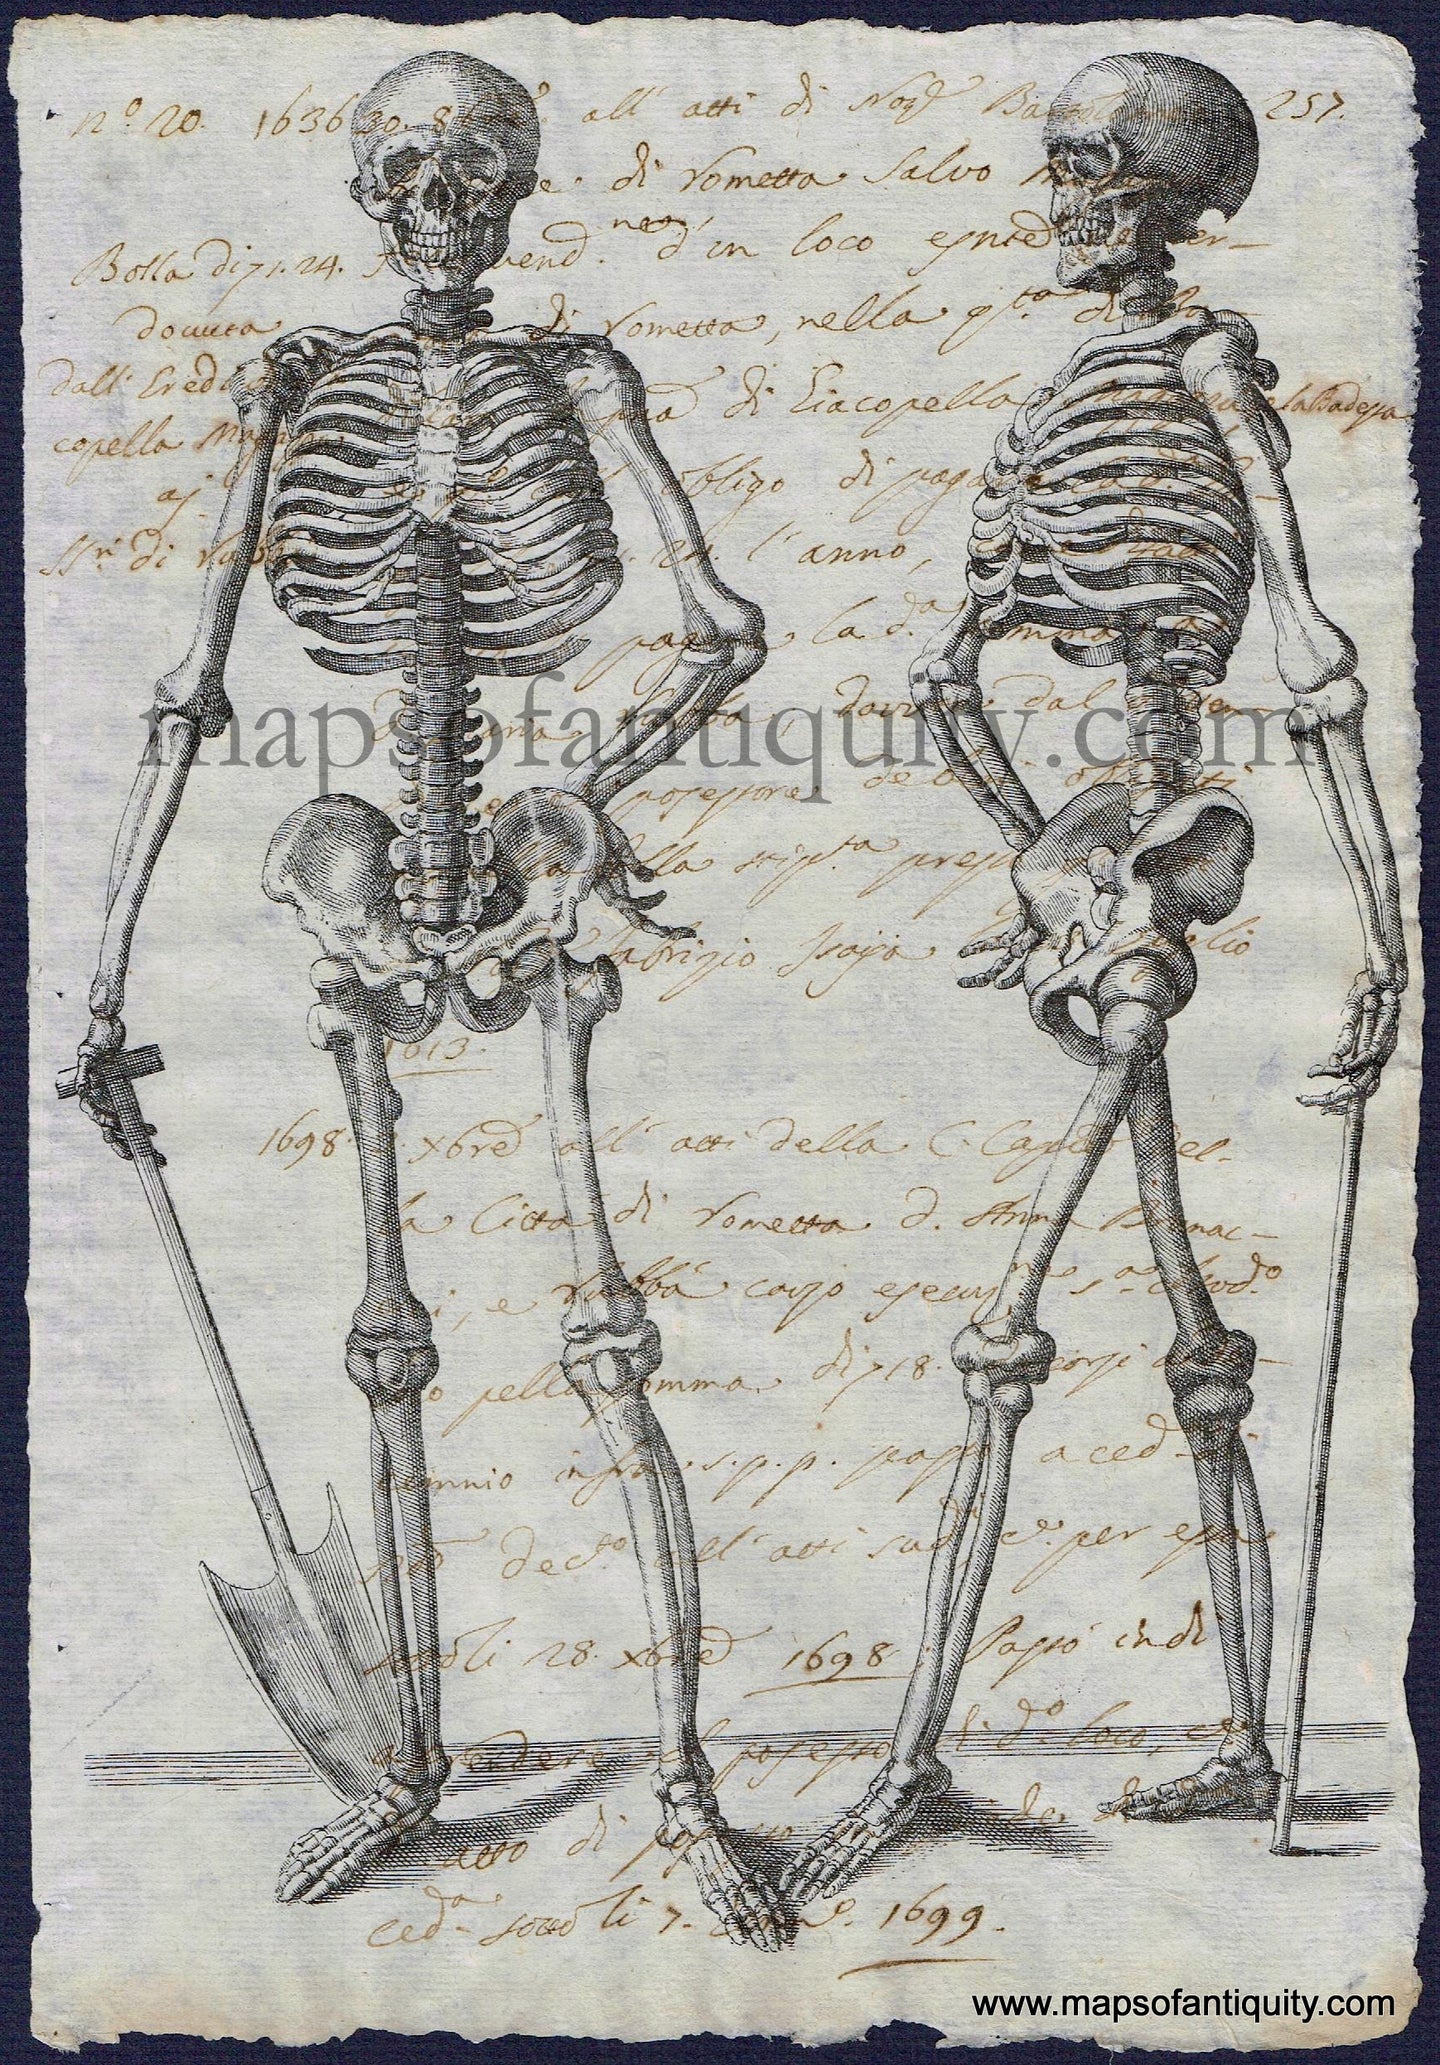 Digitally-Engraved-Specialty-Reproduction-Skeletons-Skeleton-Skeletal-System-Human-Anatomy-Anatomical-Diagram-Diagrams-Print-Prints-Reproductions-on-Antique-Paper-1800s-19th-century-Maps-of-Antiquity